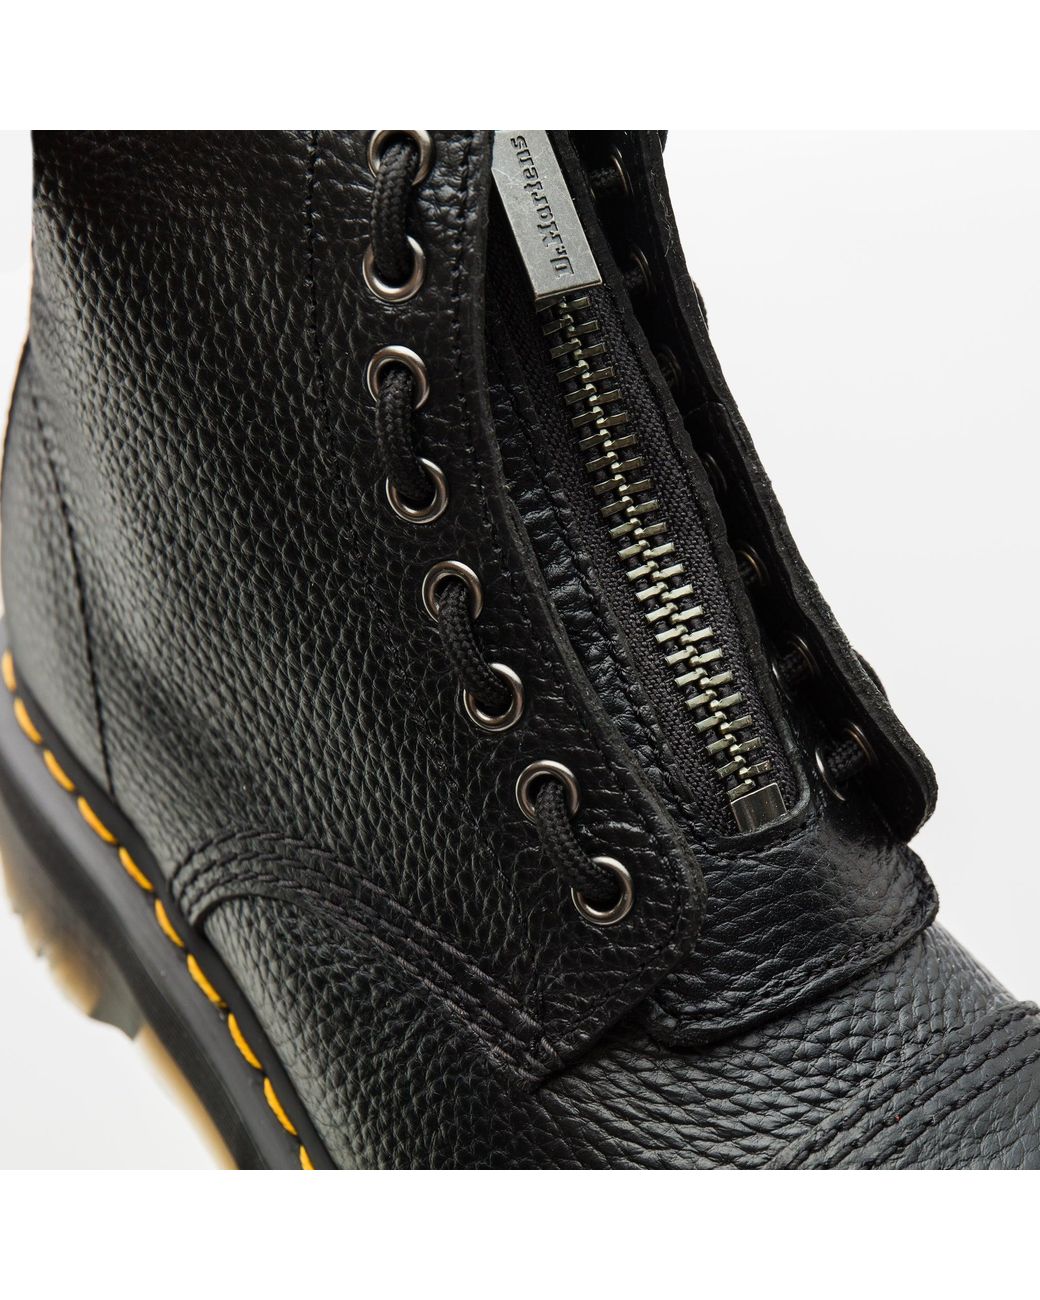 Dr. Martens Milled Nappa Leather Sinclair Platform Boots in Black | Lyst